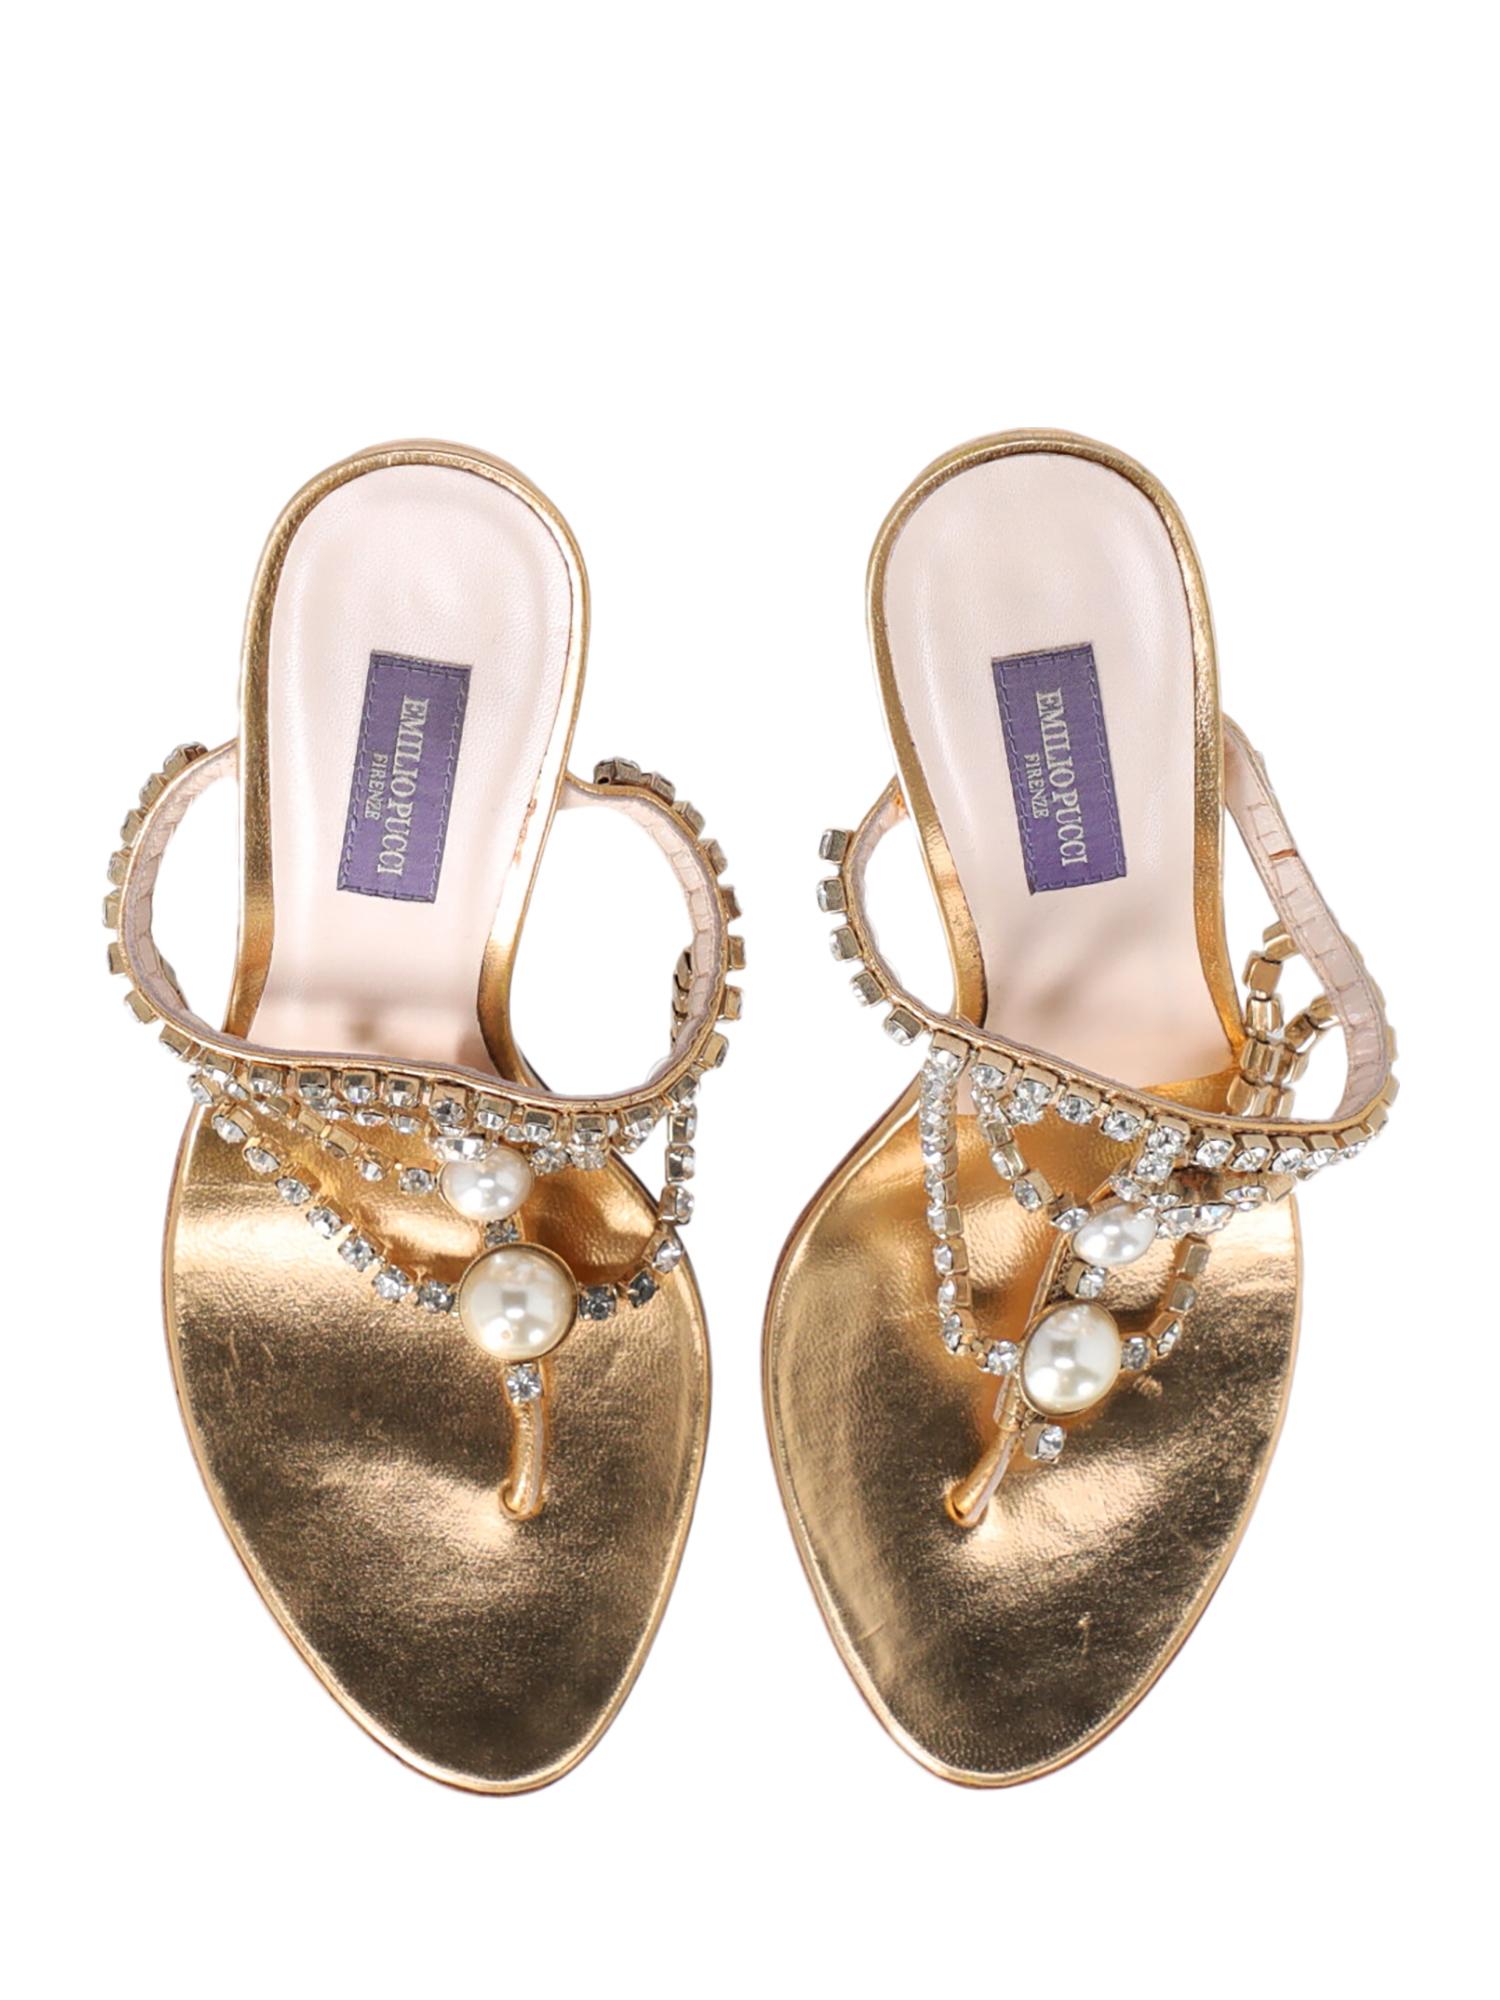 Emilio Pucci Woman Sandals Gold Leather IT 36 For Sale 1